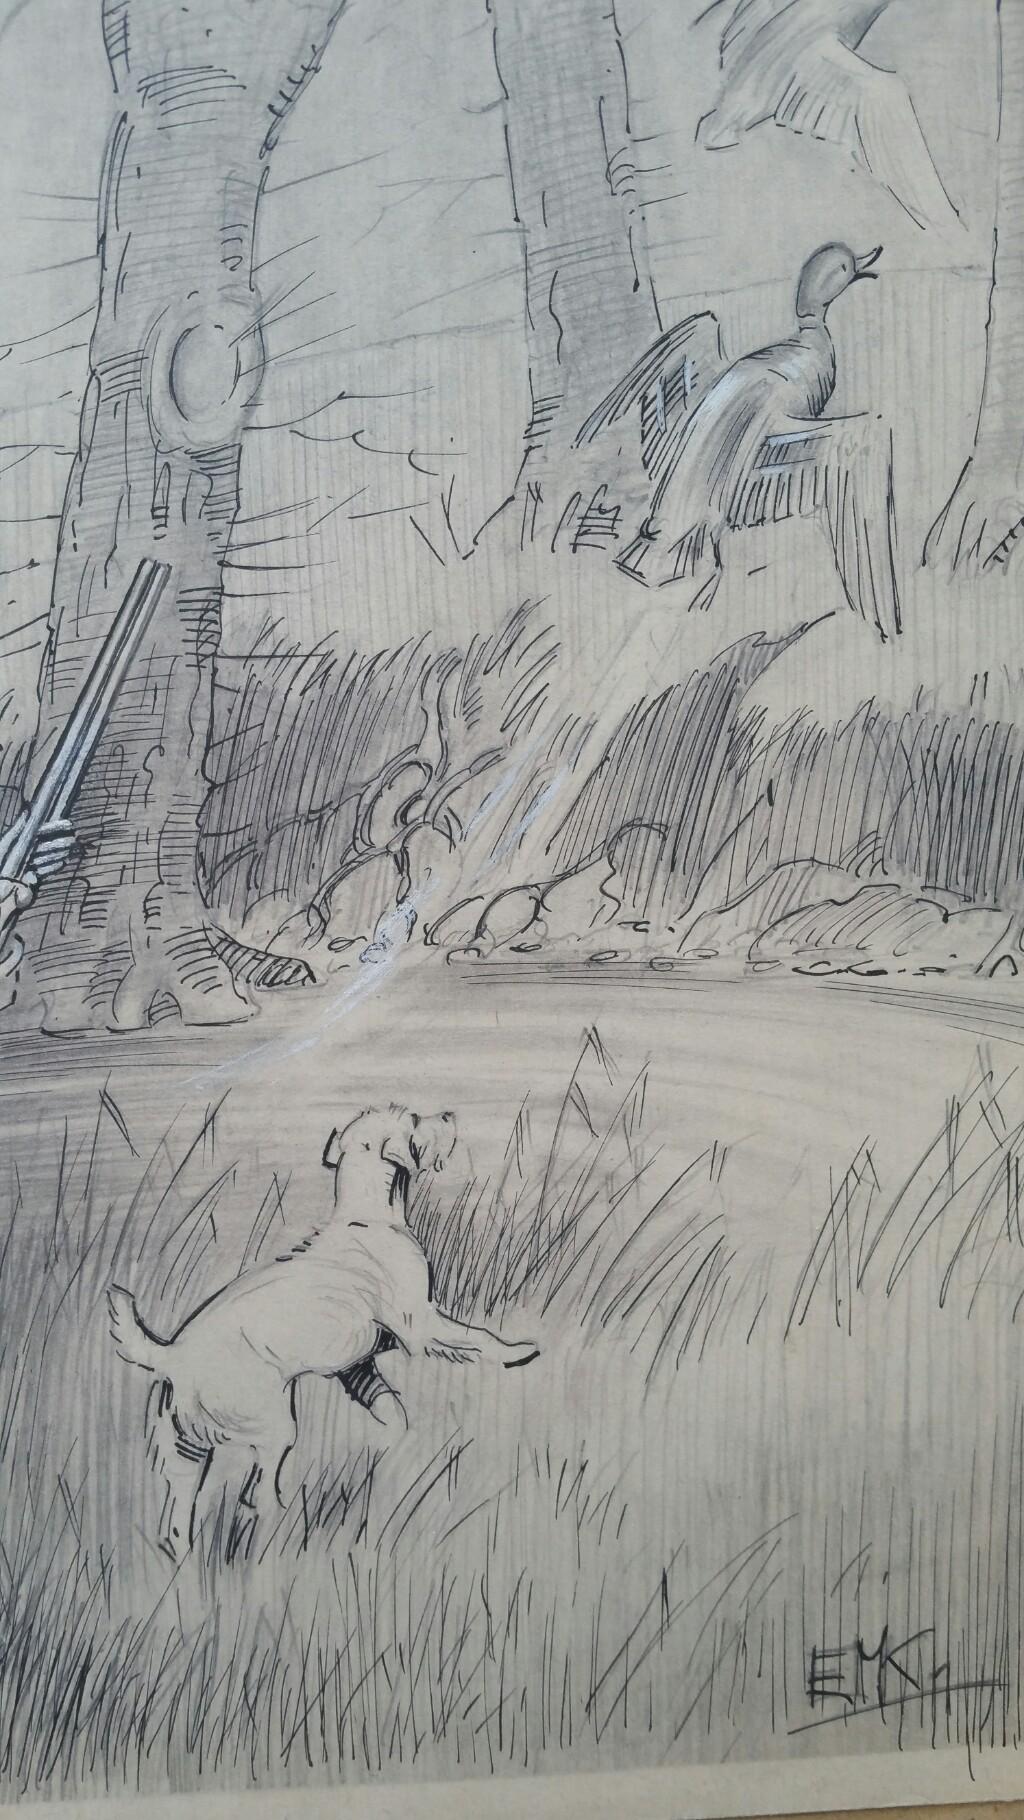 Sporting Dogs: a sportsman with gun accompanied by dogs on a hunt, one depicted retrieving, the other flushing ducks
by Eric Meade-King (1911-1987)
each signed by initials lower right in image, inscribed to lower margins in pencil
graphite and ink